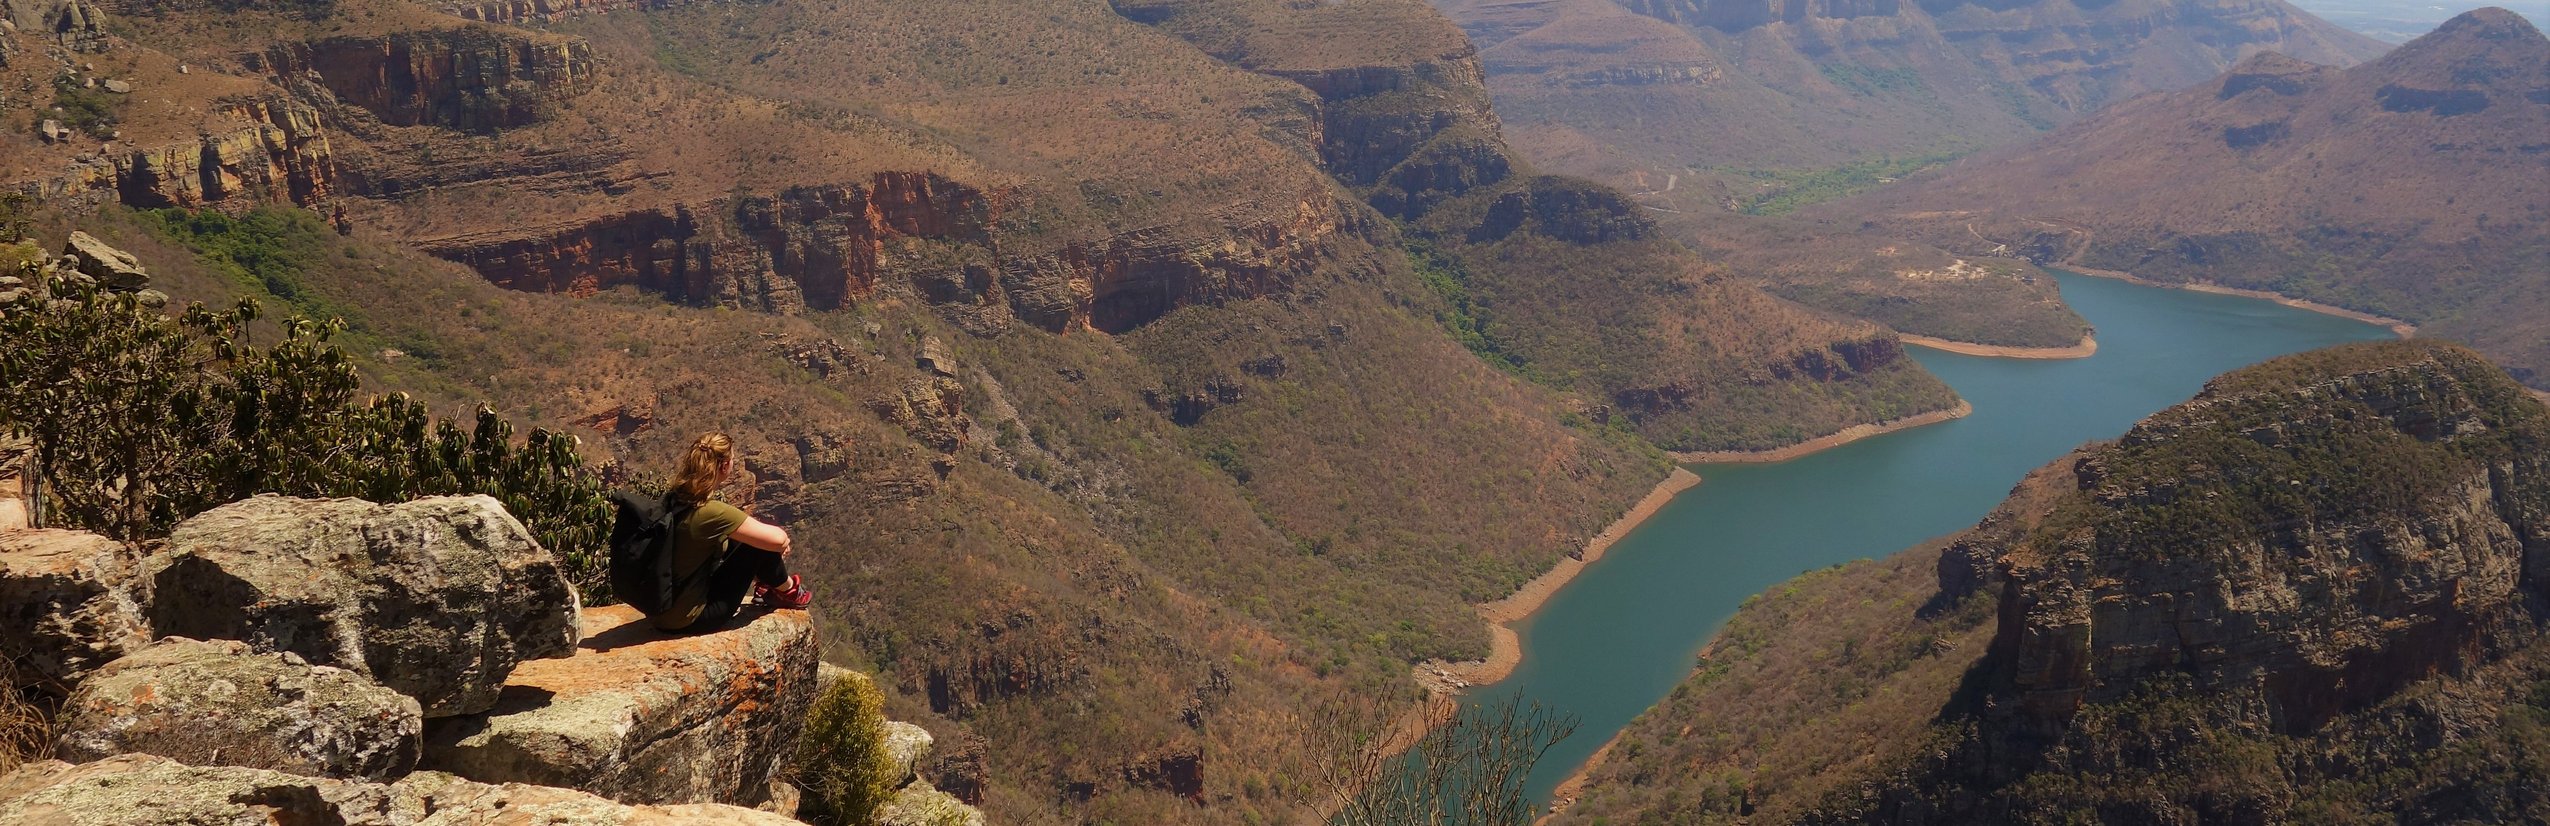 Panorama Route mit Kindern - Der Blyde River Canyon - Ein Highlight der Panorama Route - Canyon